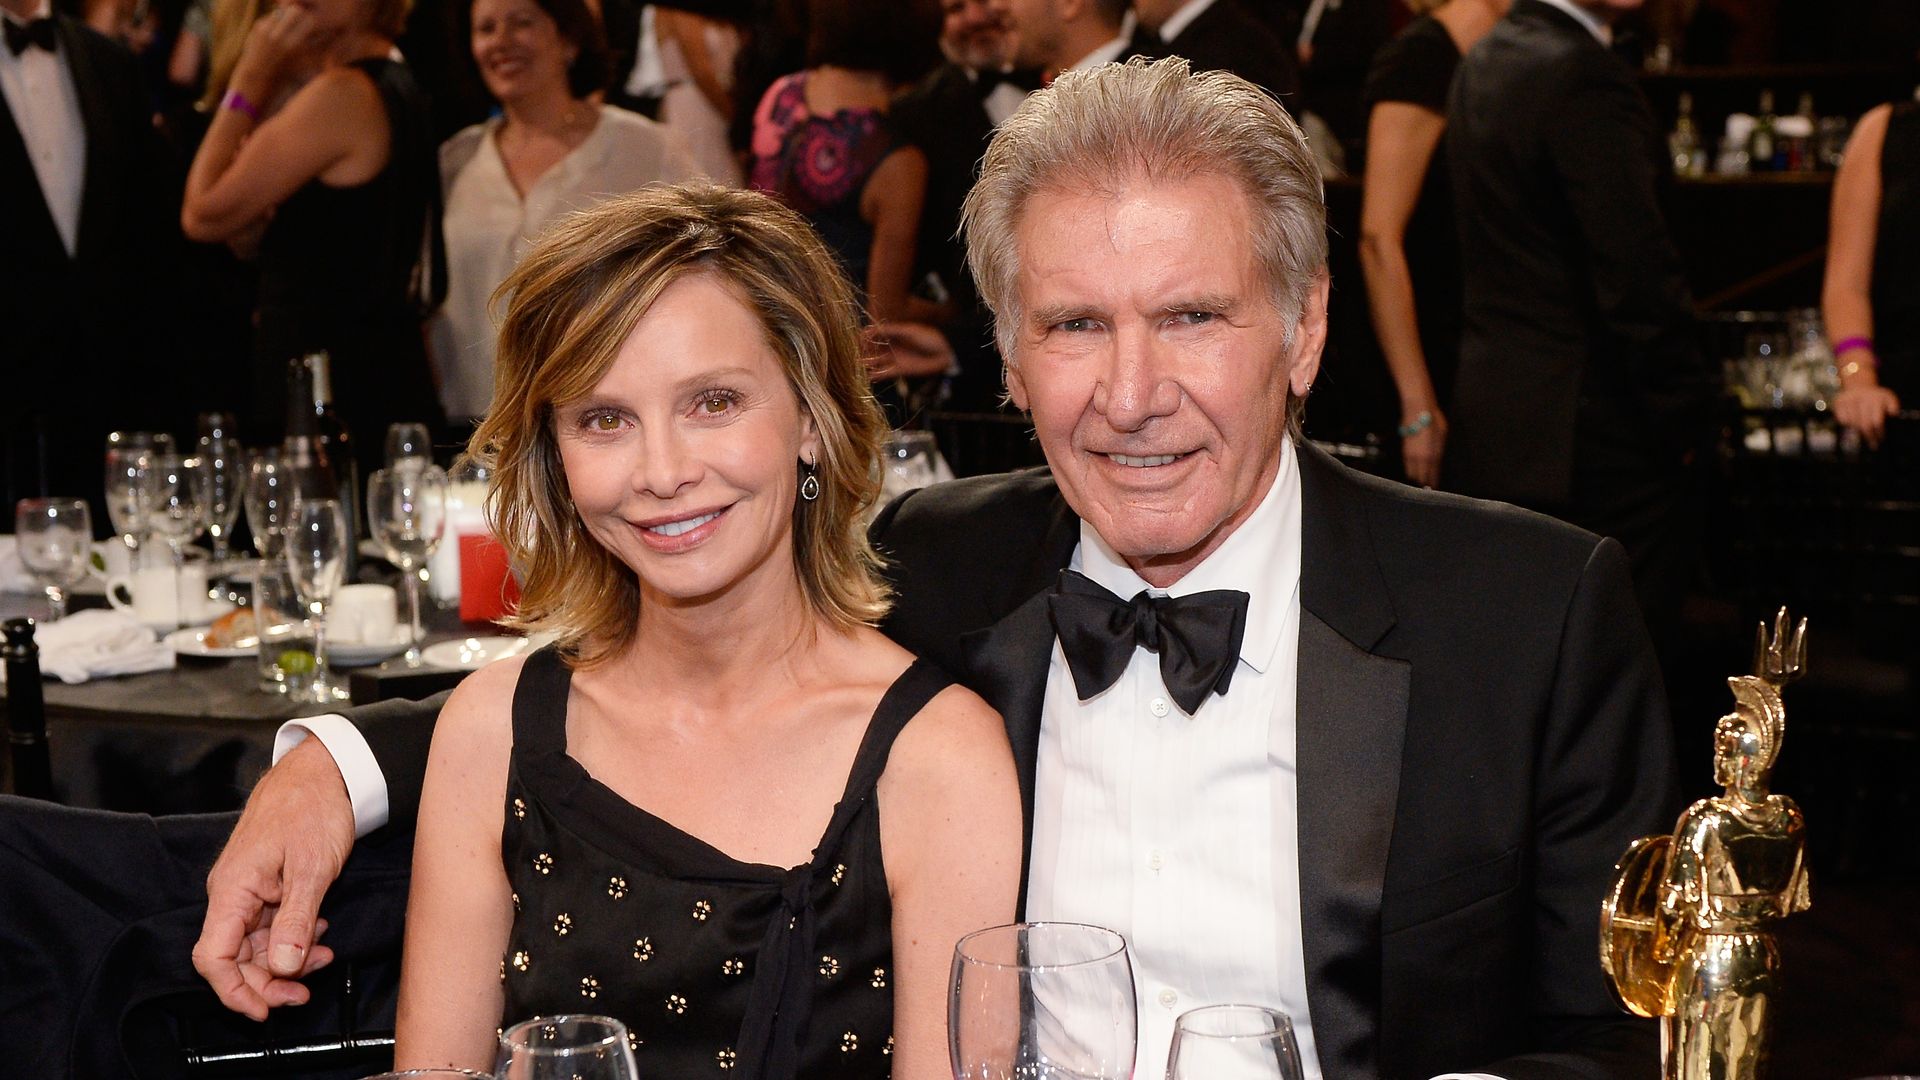 Harrison Ford at a Gala with wife Calista Flockhart